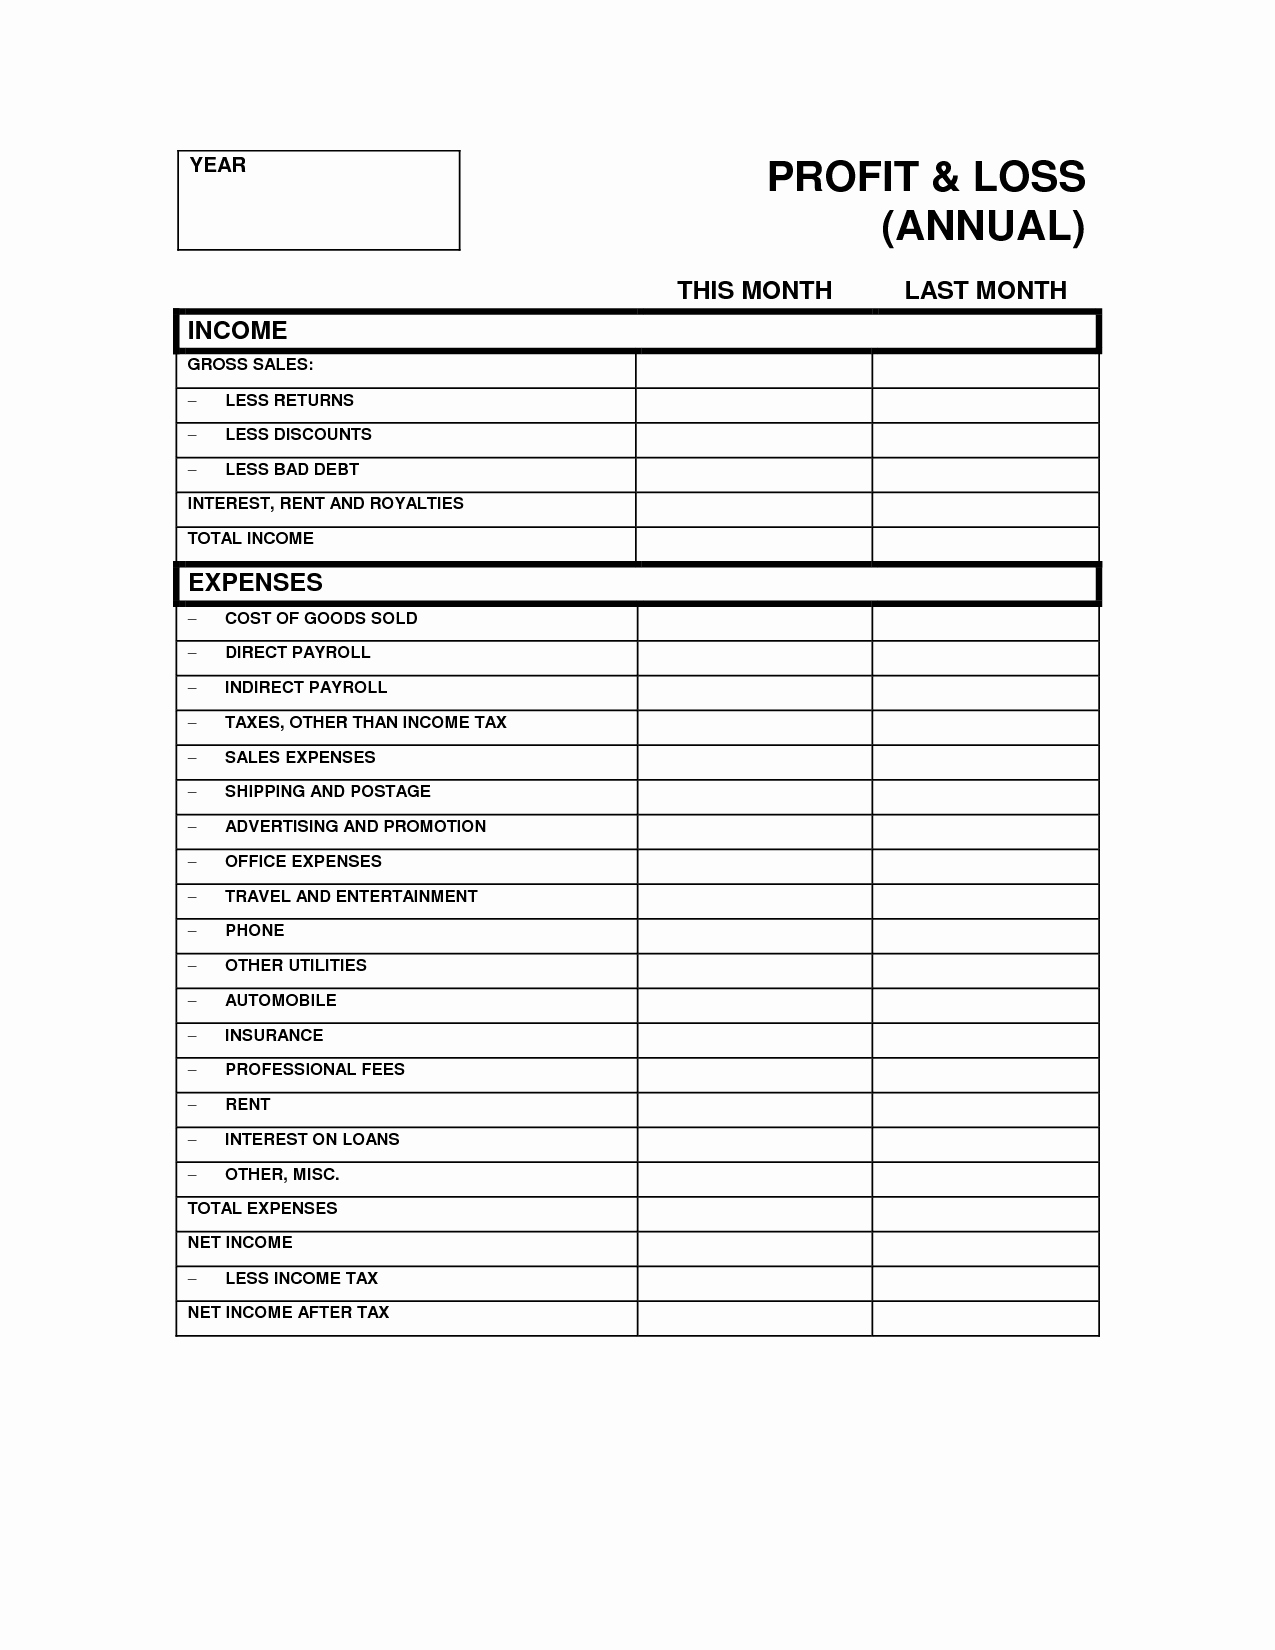 Blank Profit and Loss Sheet Awesome Blank Profit and Loss Statement Example Mughals